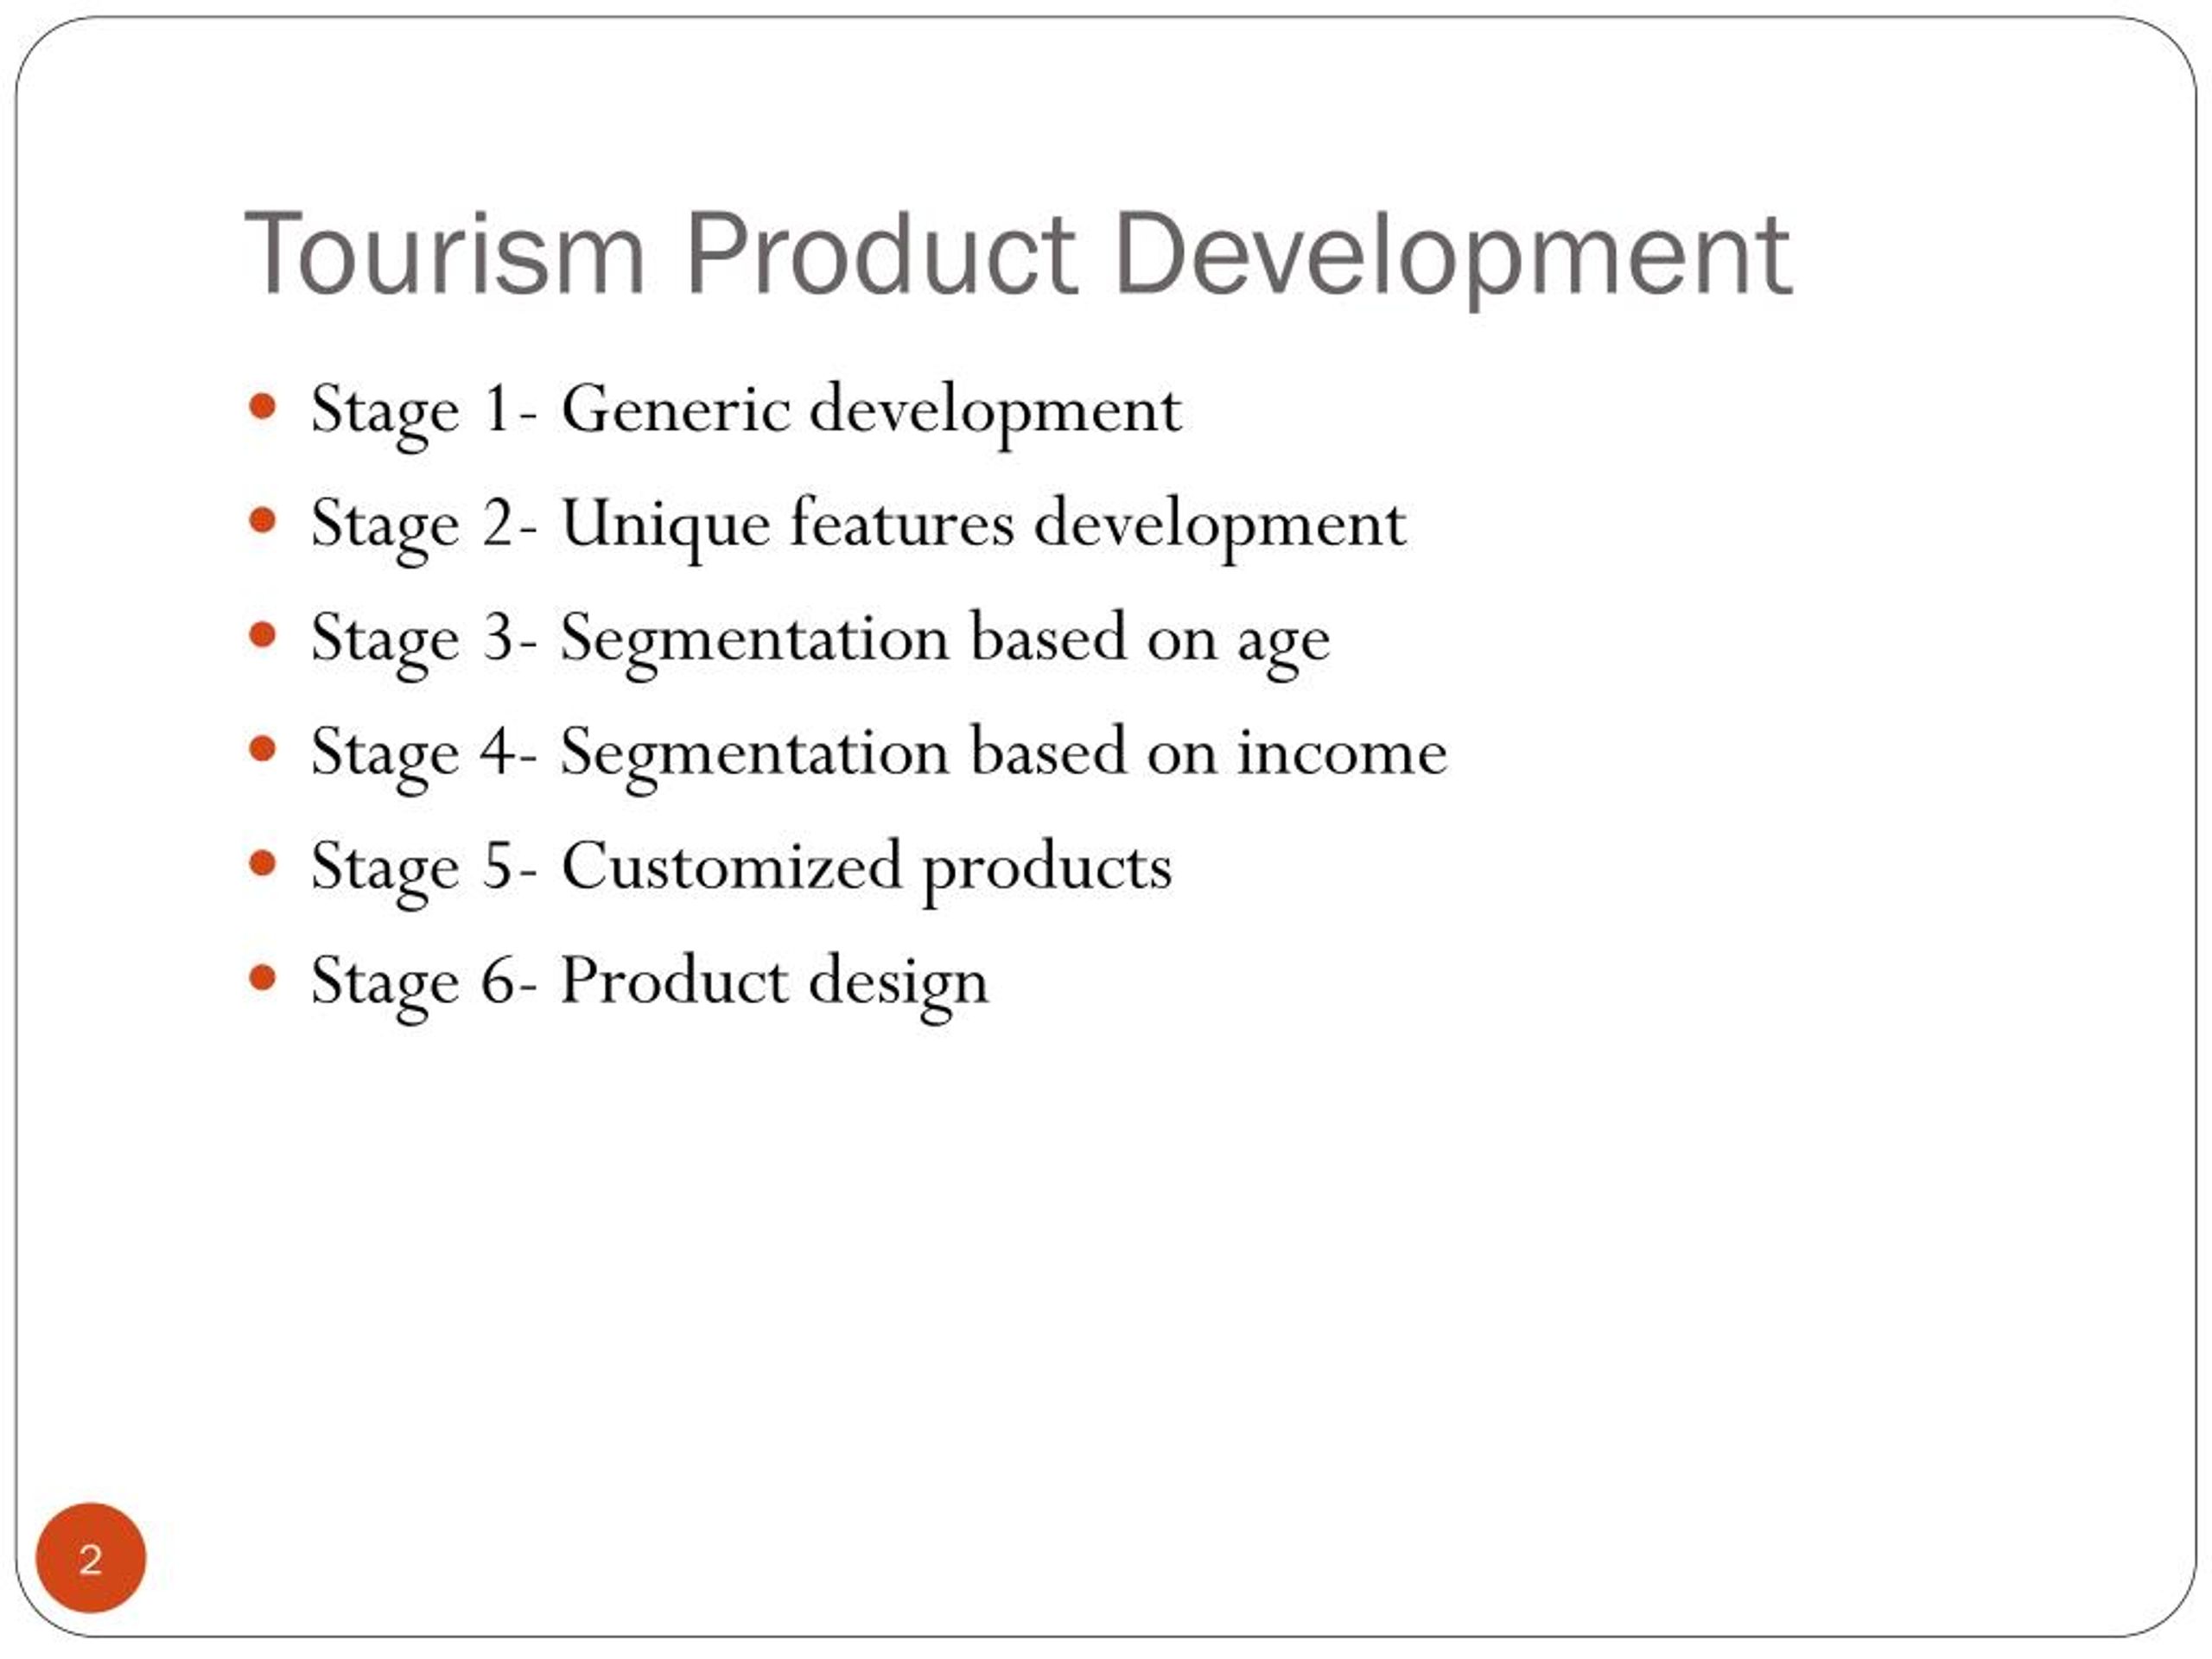 tourism product development examples